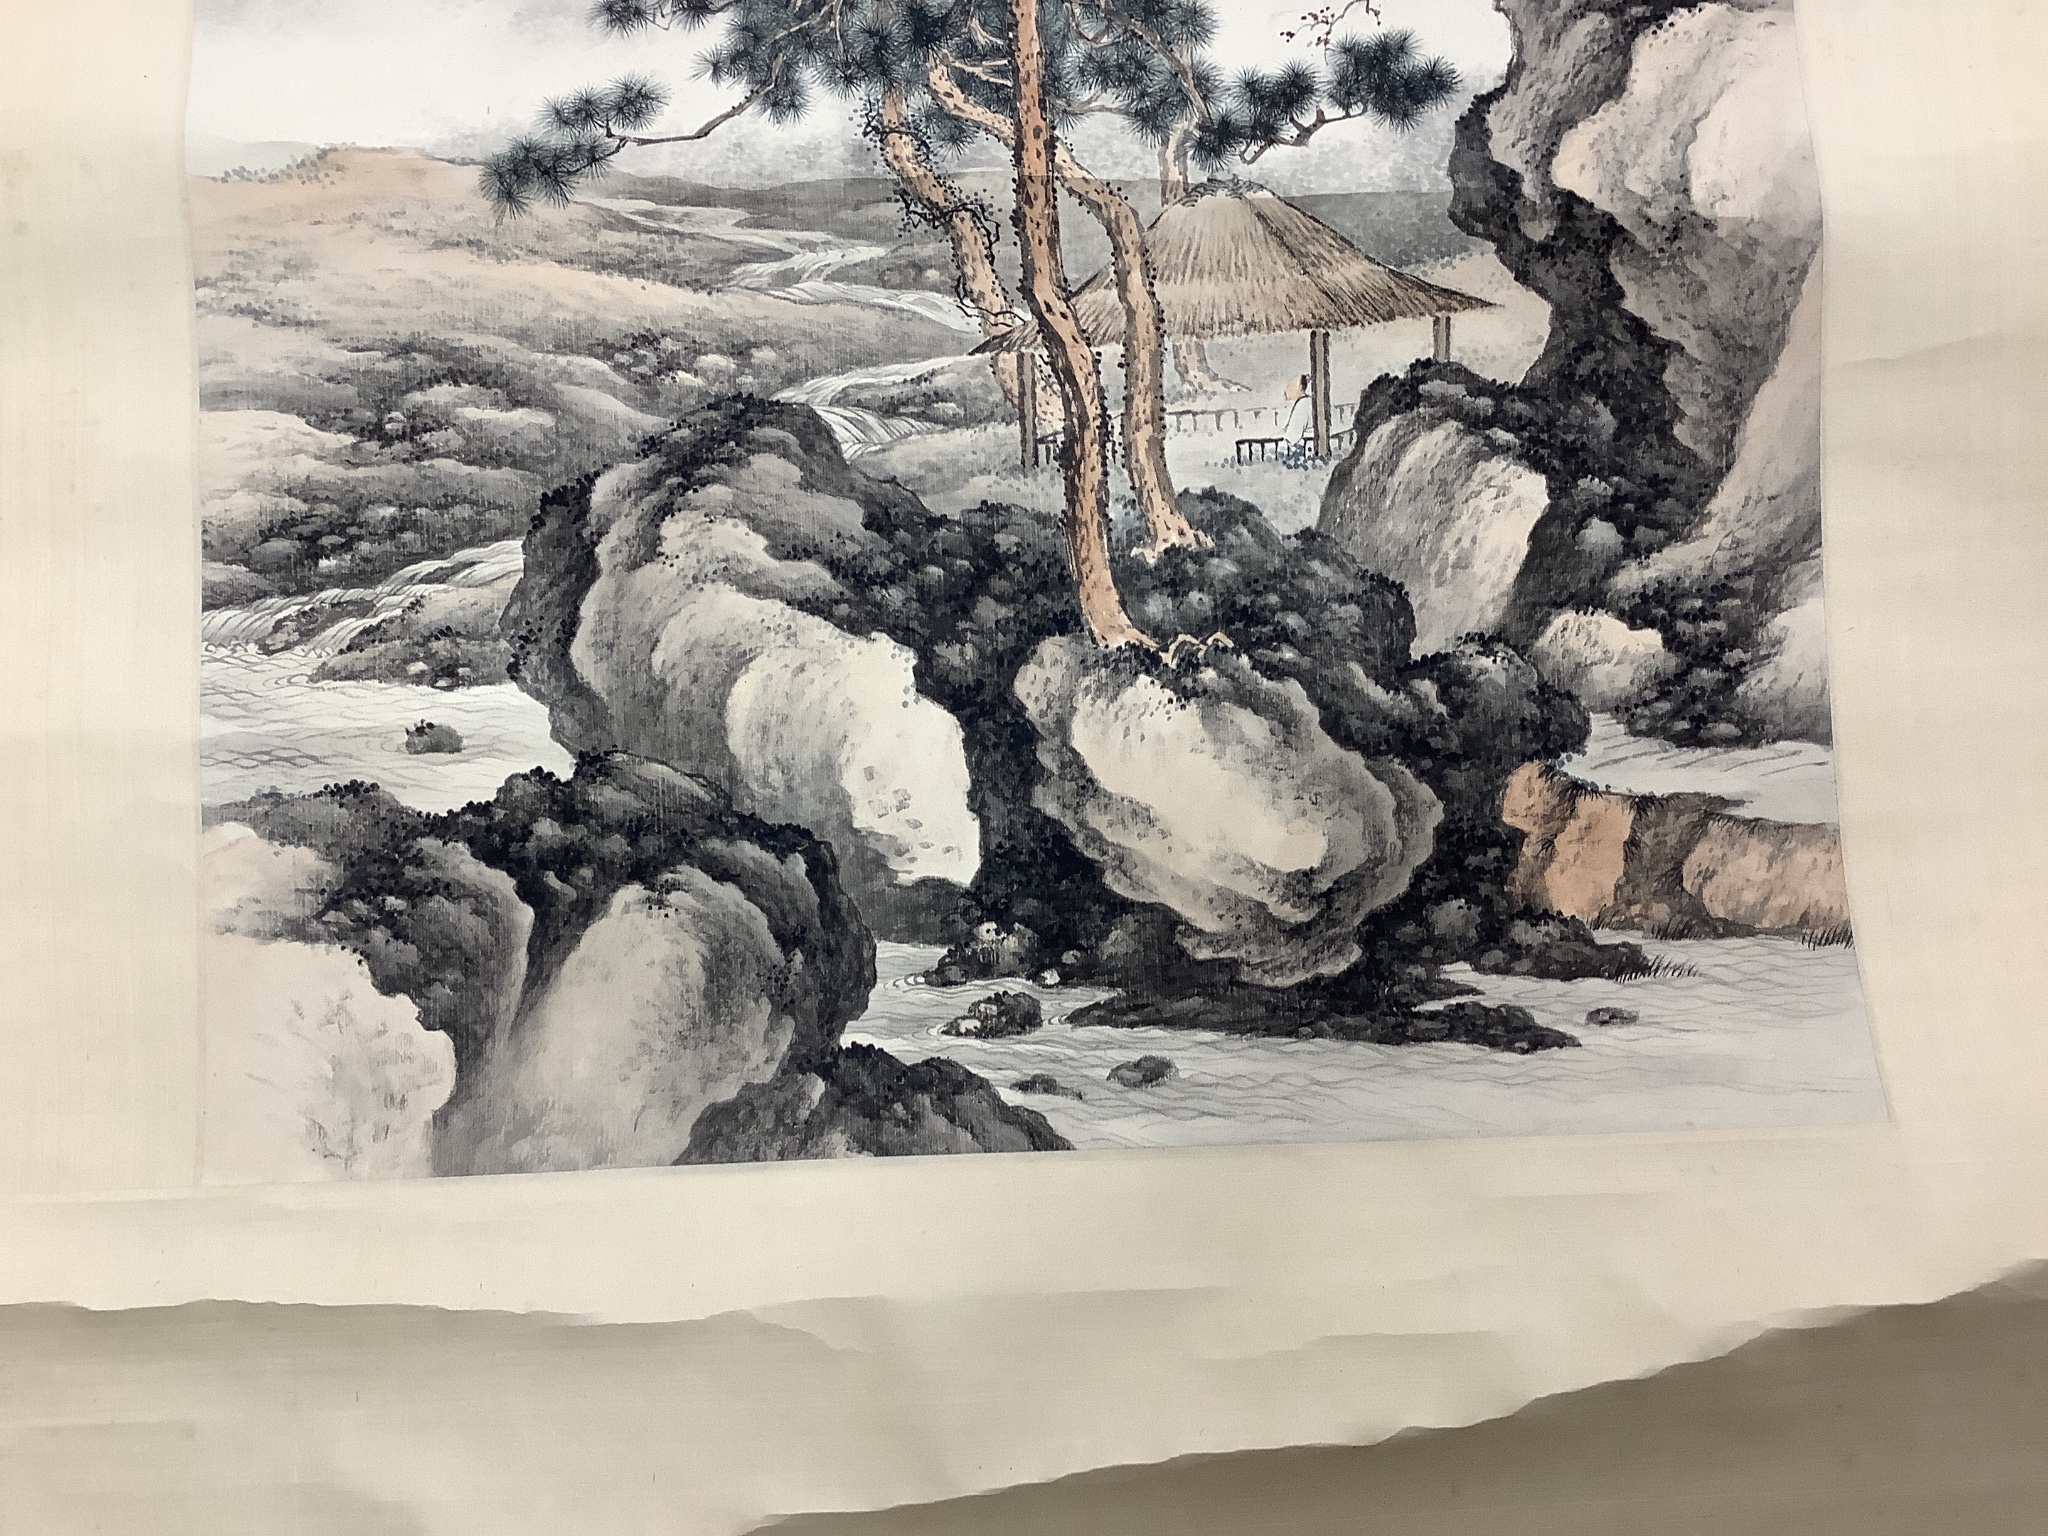 A Chinese scroll painting of a scholar seated in a mountainous river landscape, 20th century Image 94 cm X 45 cm